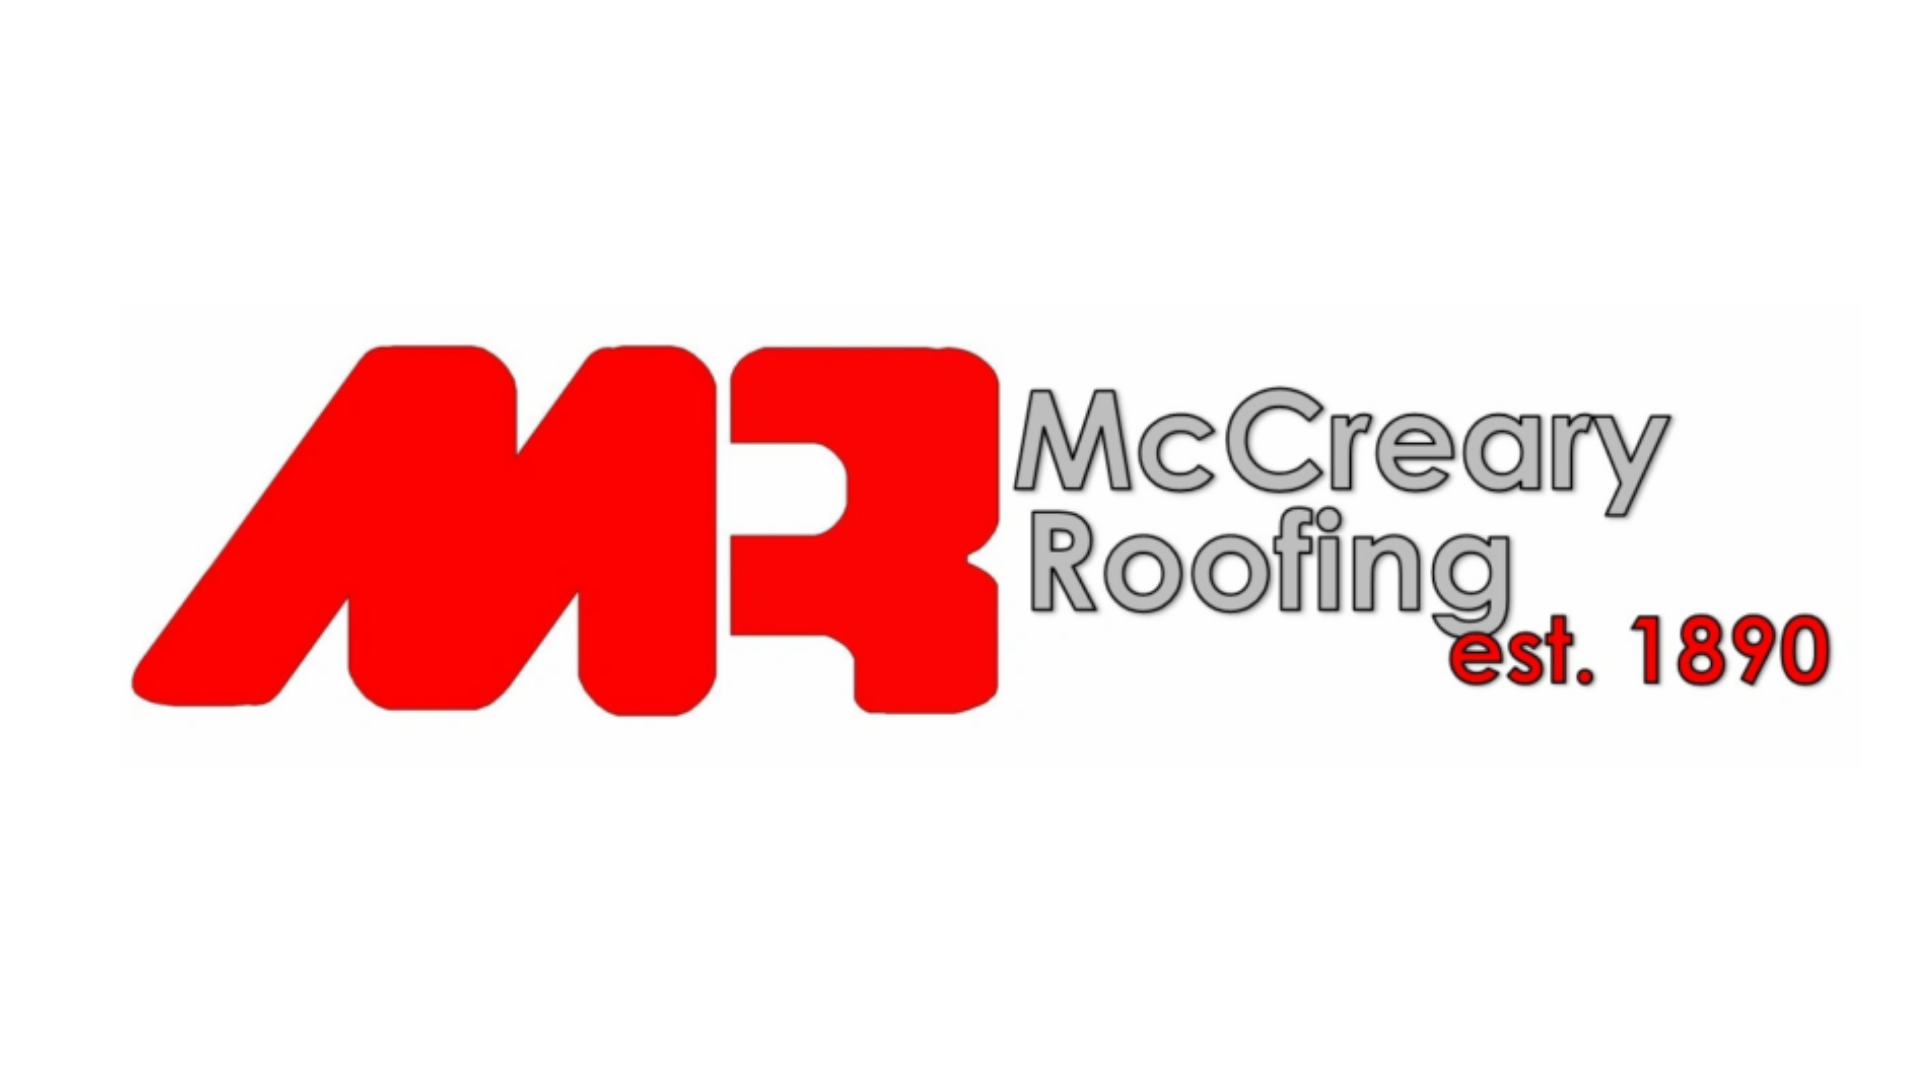 McCreary Roofing